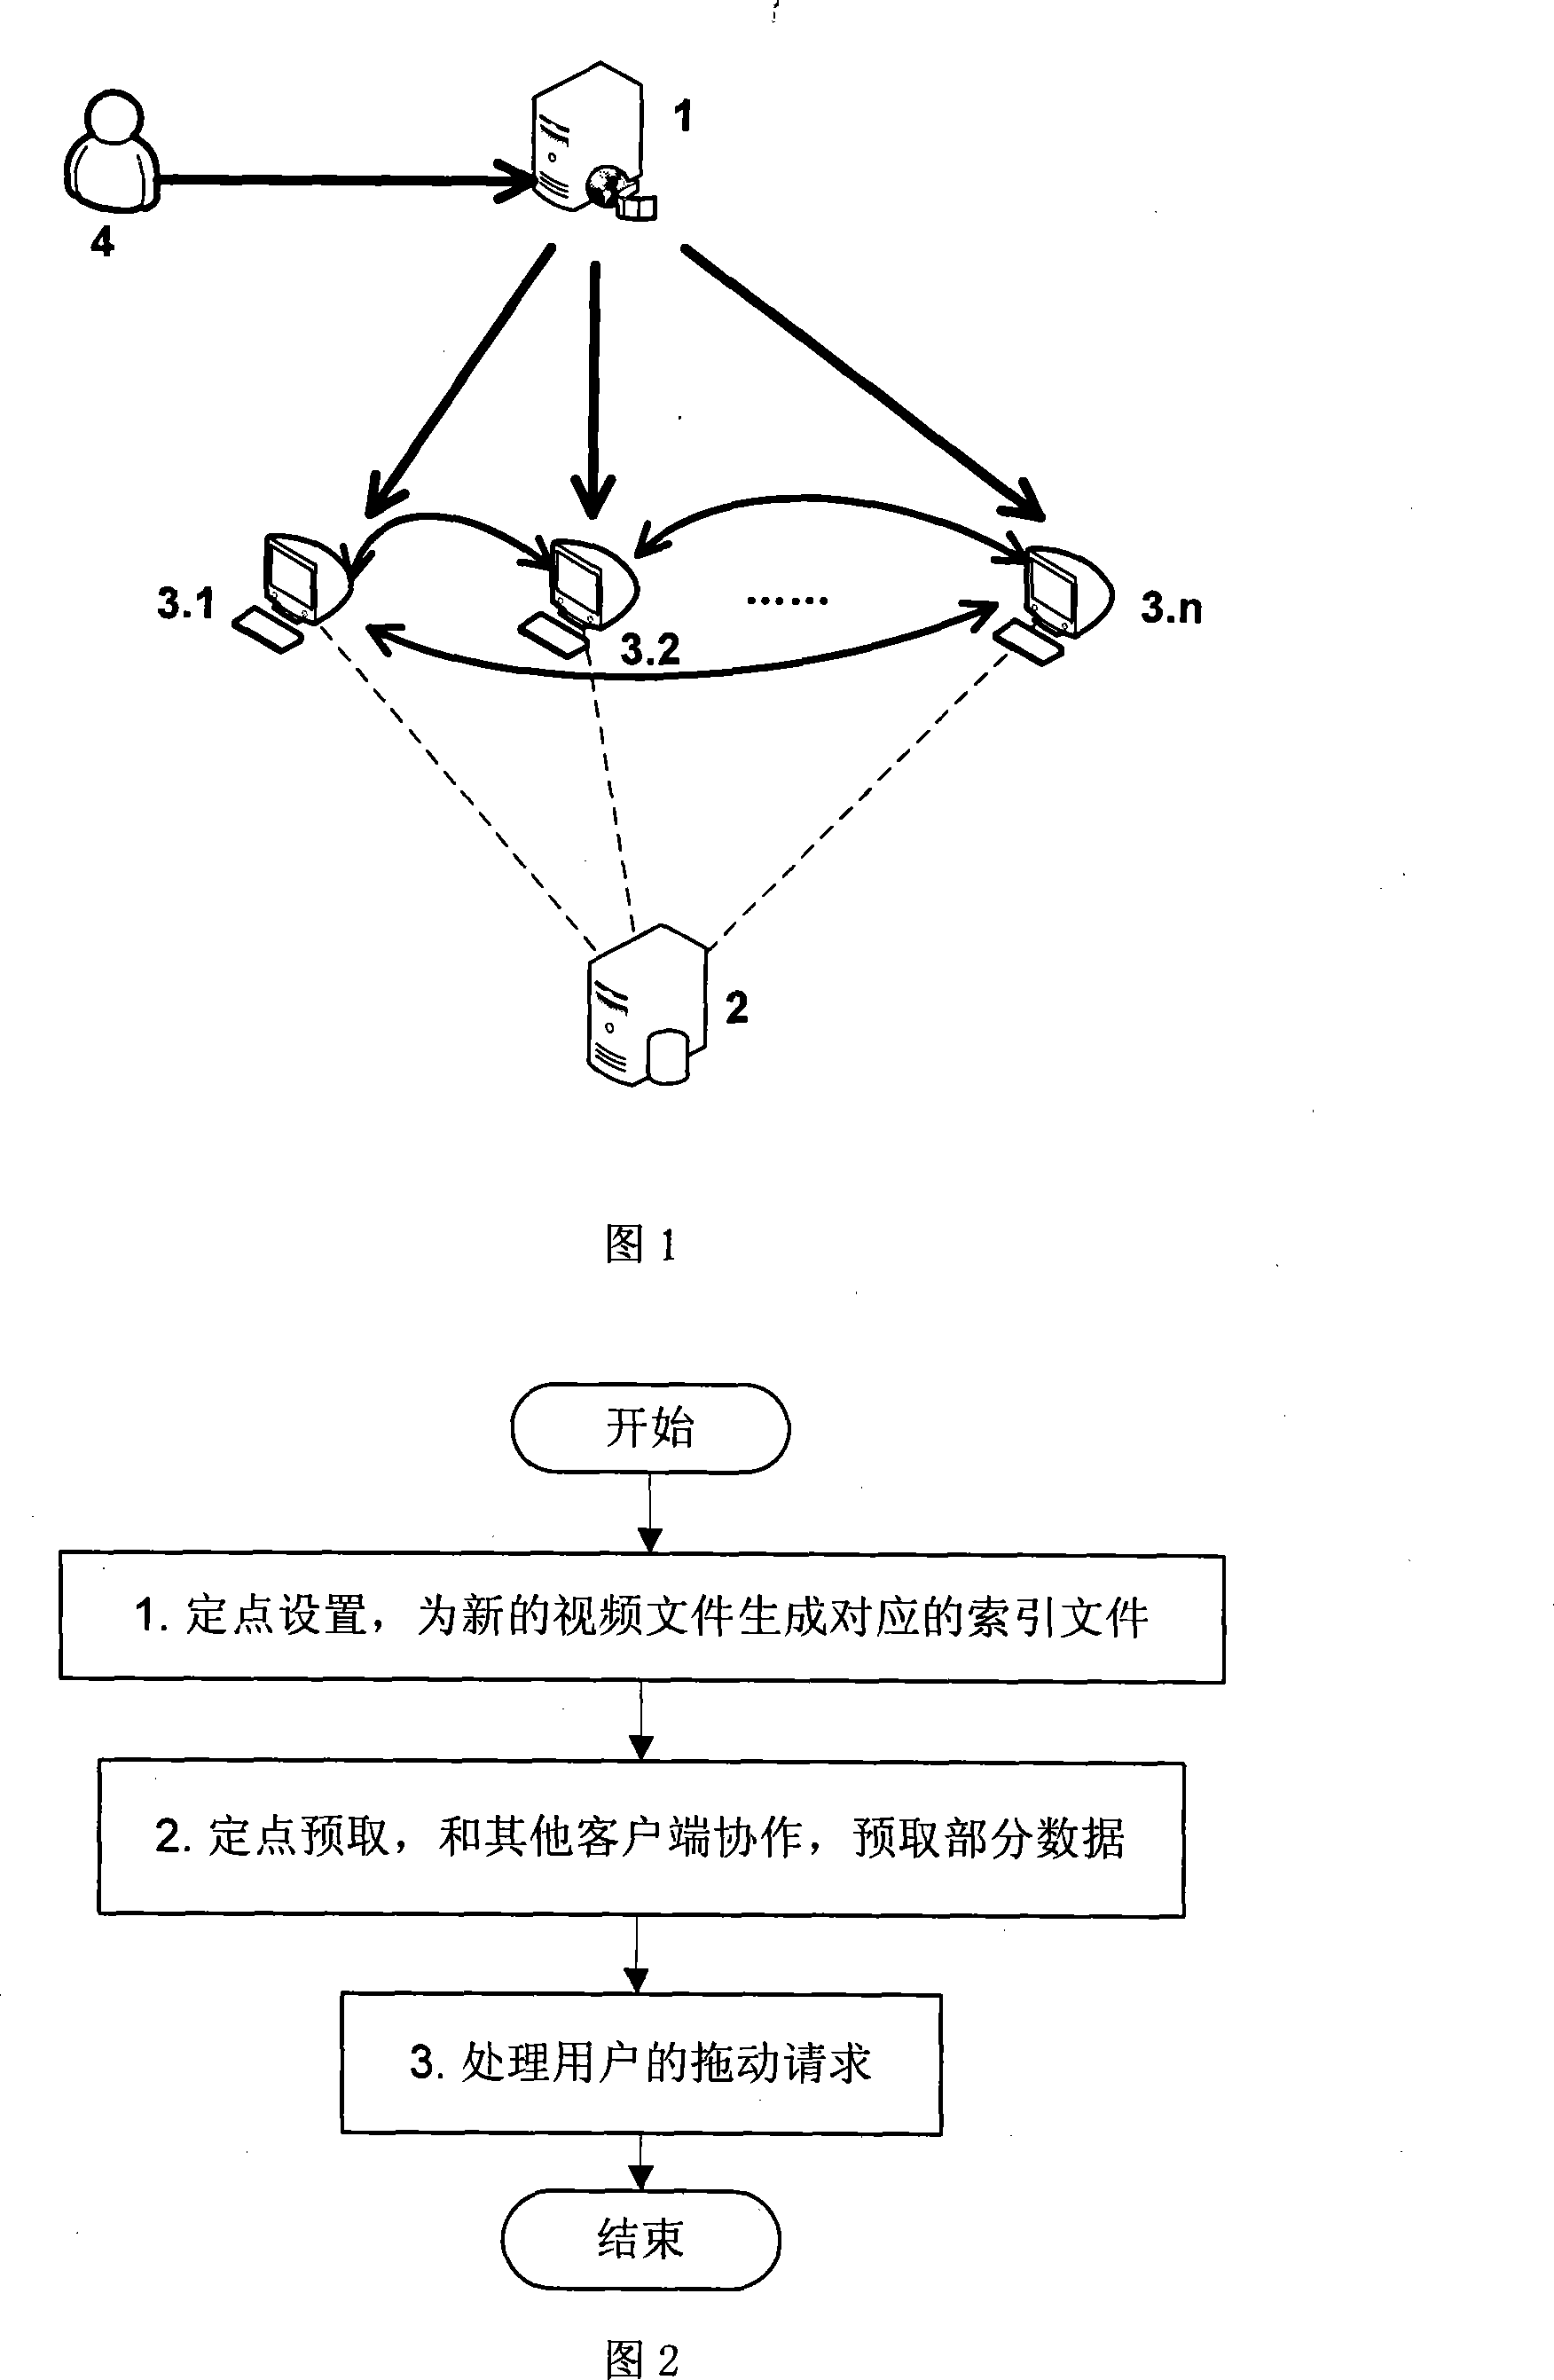 Fixed data pre-access method in peer network order system